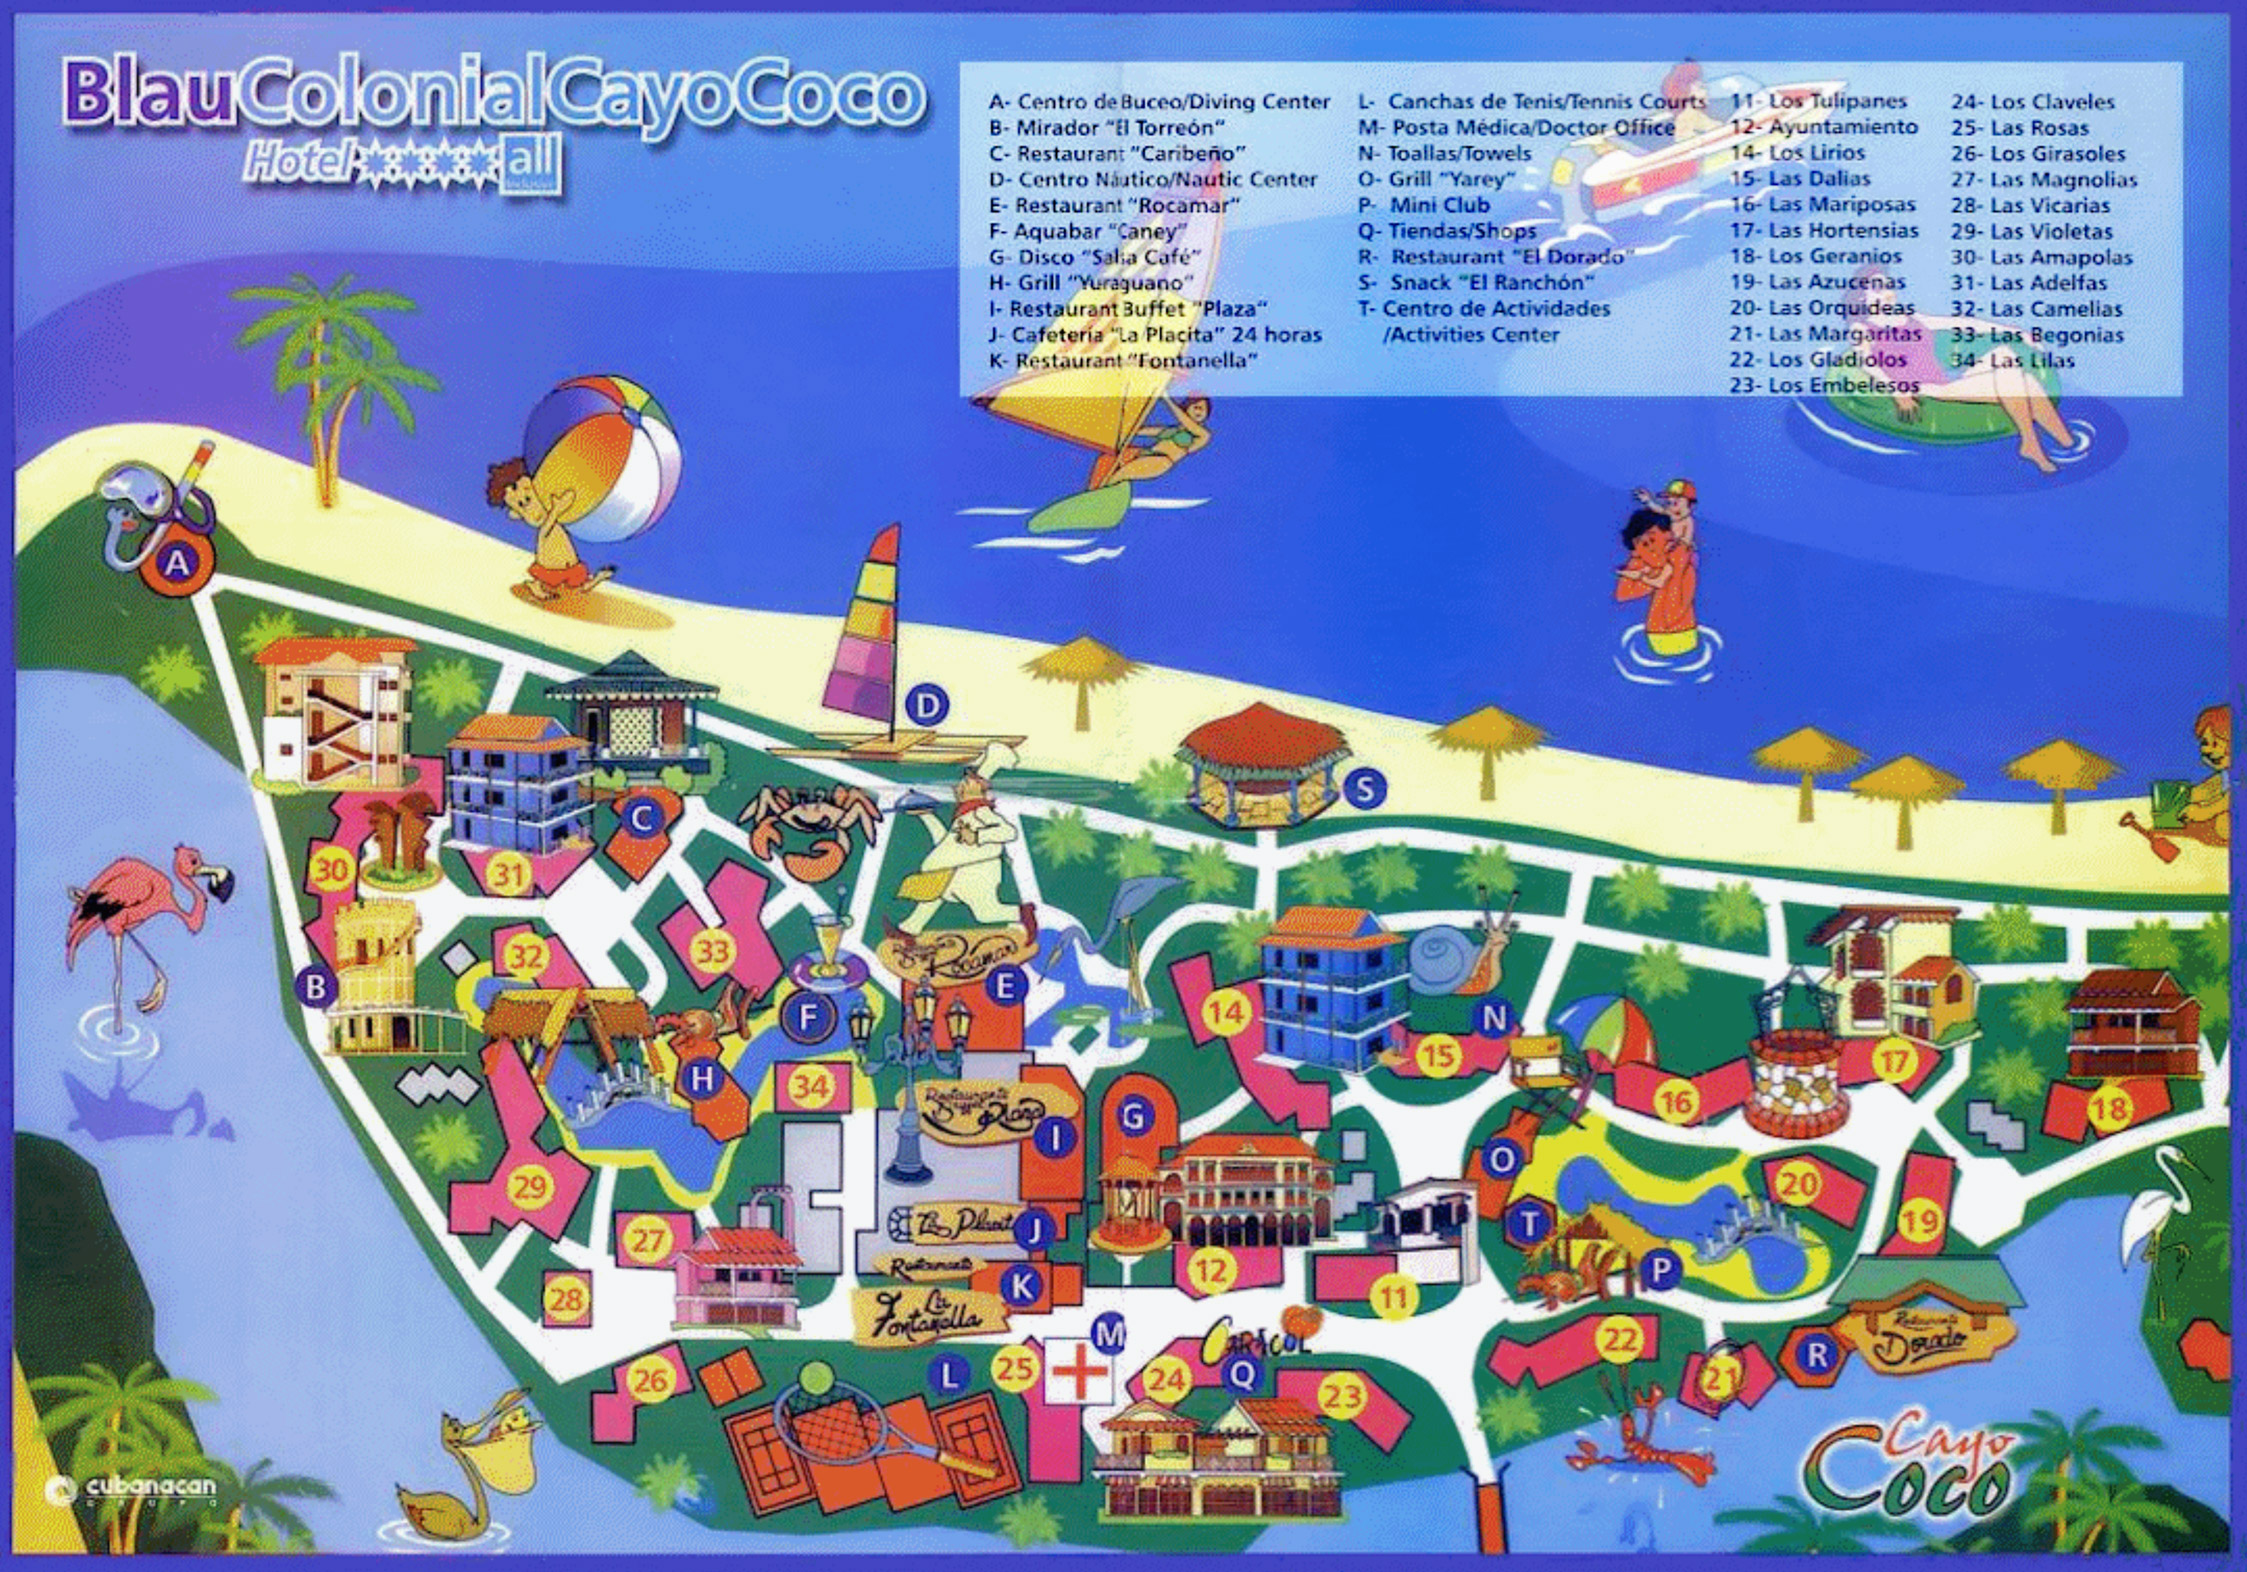 What are some important locations on a map of Cayo Coco, Cuba?